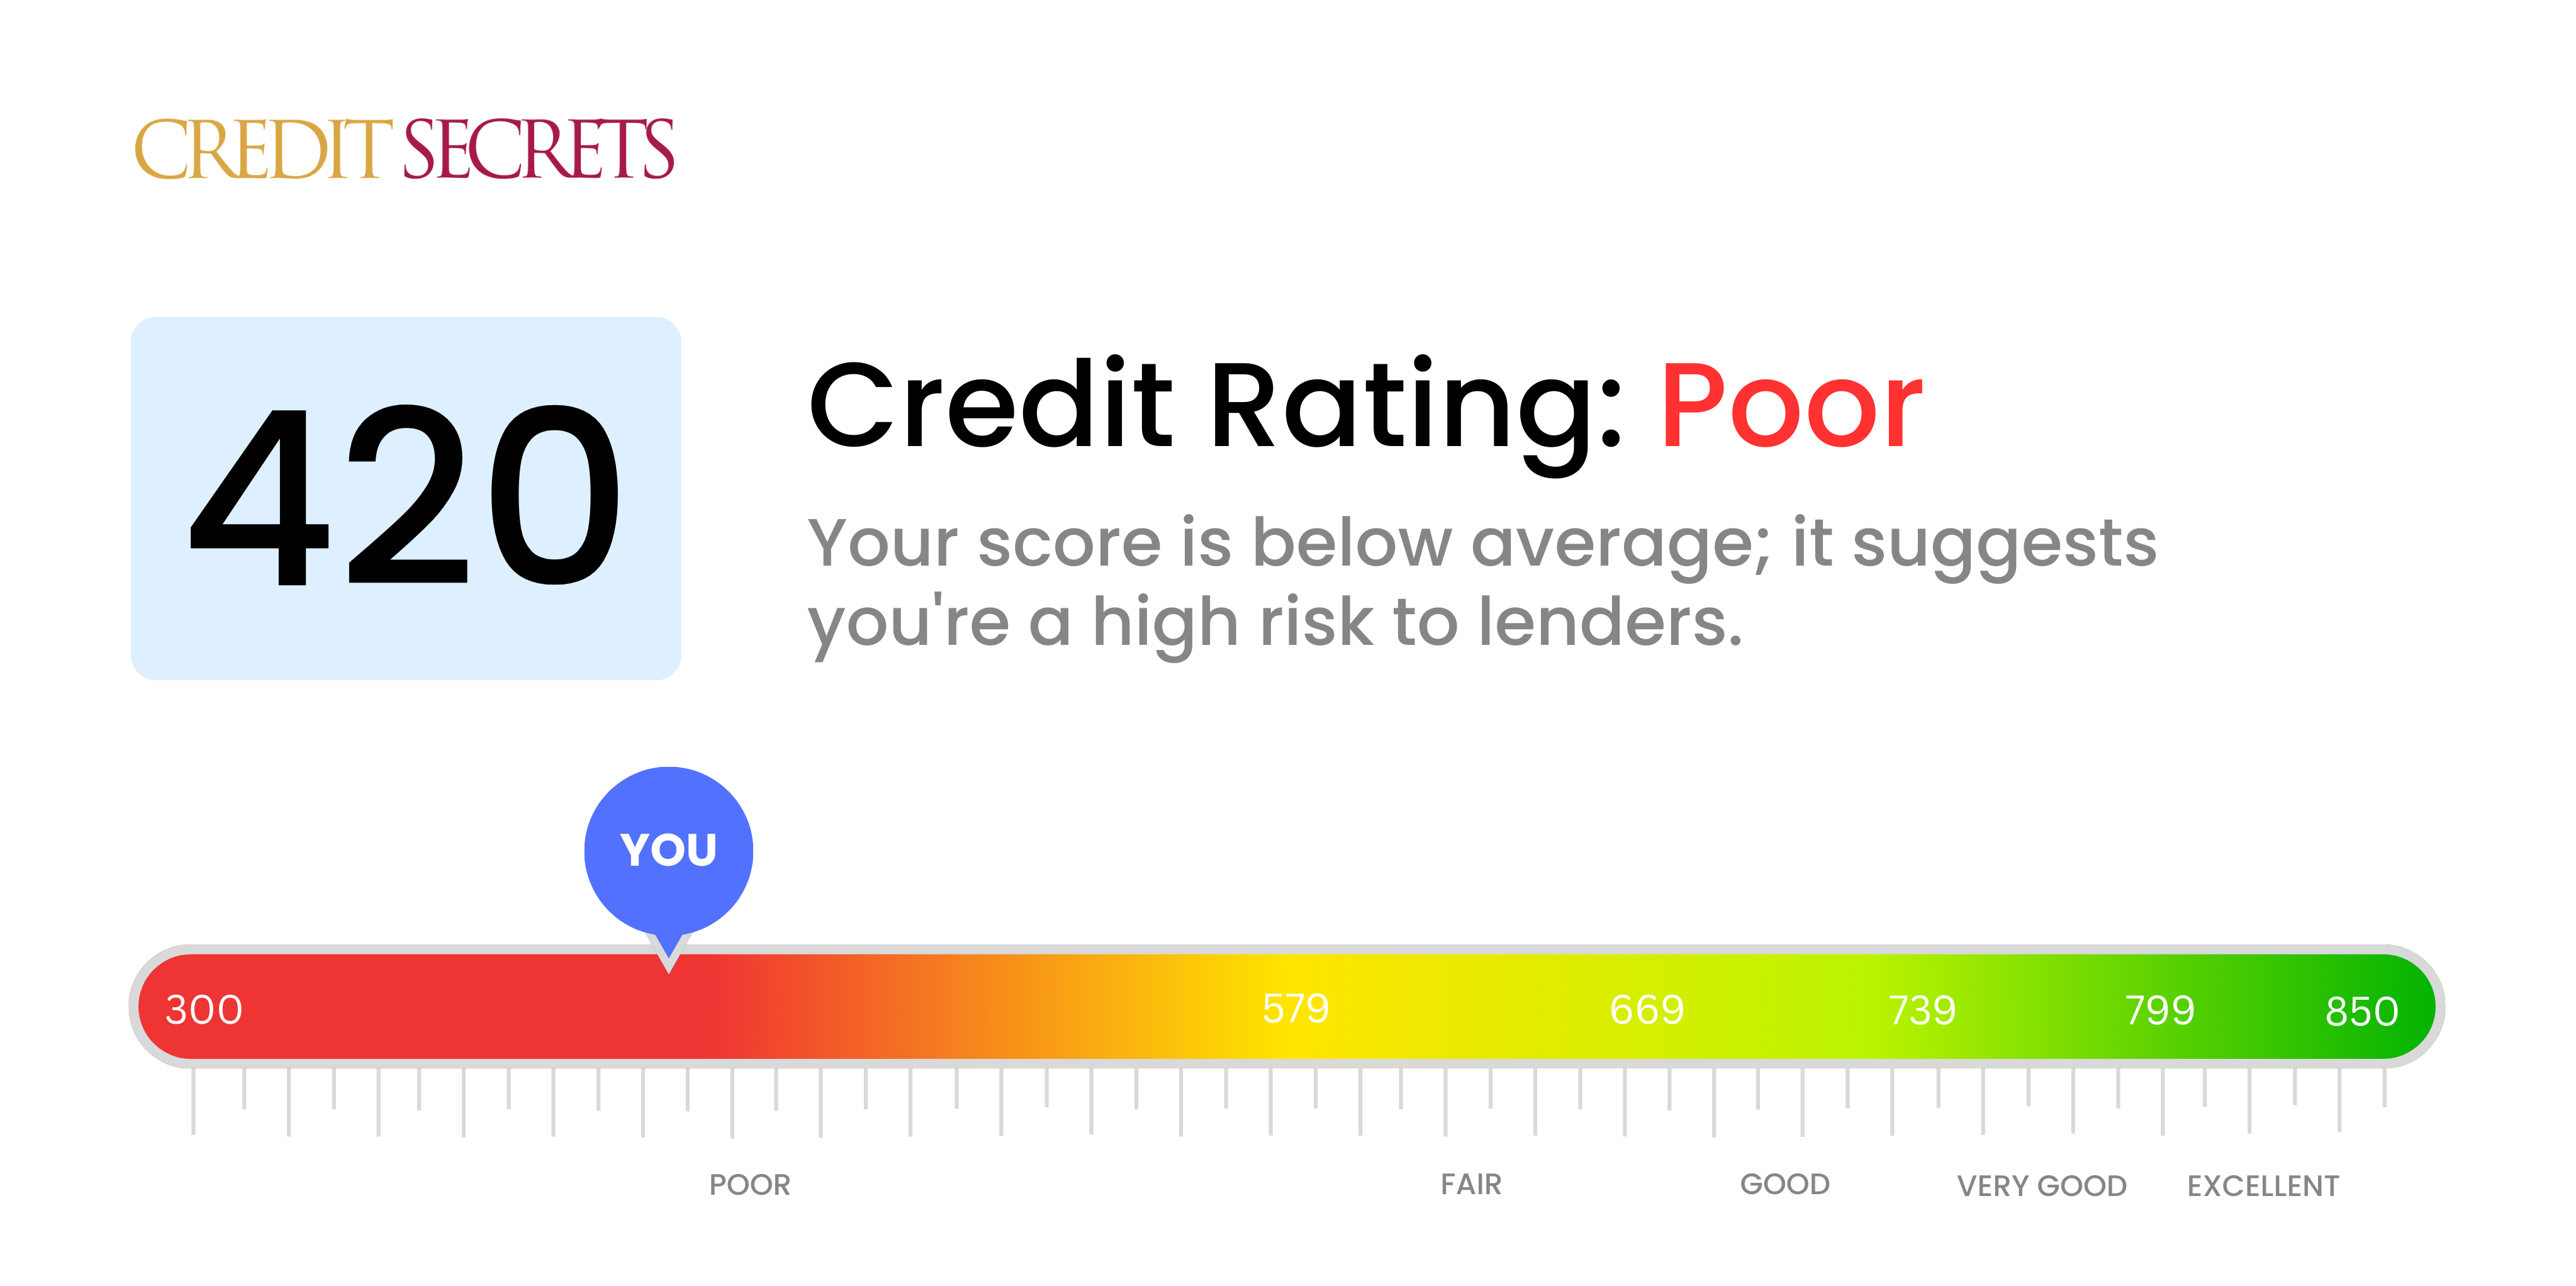 Is 420 a good credit score?